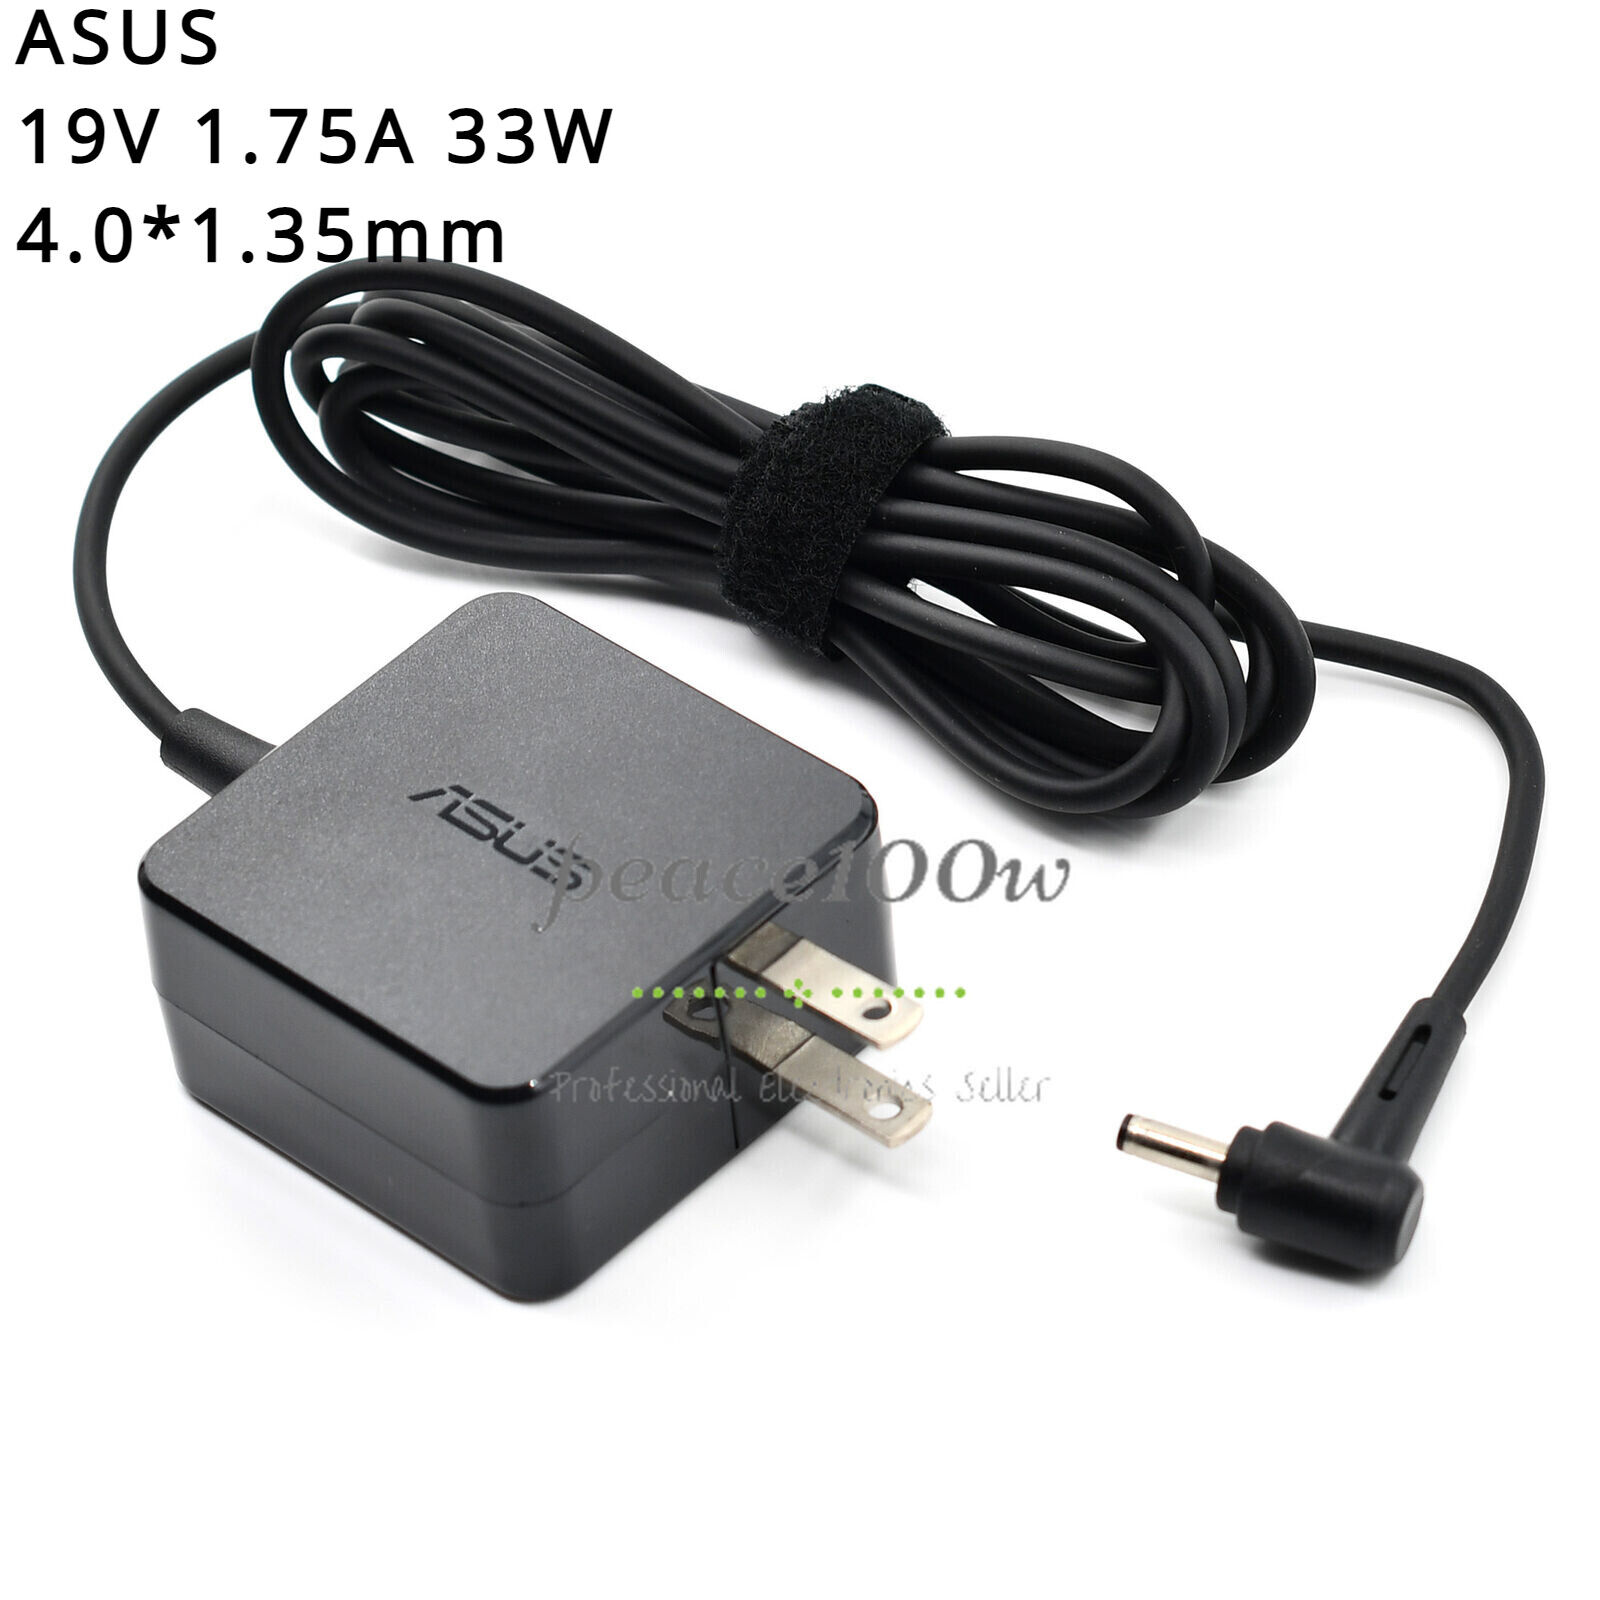 Genuine ASUS E203MA E203M E203MA-YS03 33W 19V 1.75A AC Power Adapter Charger